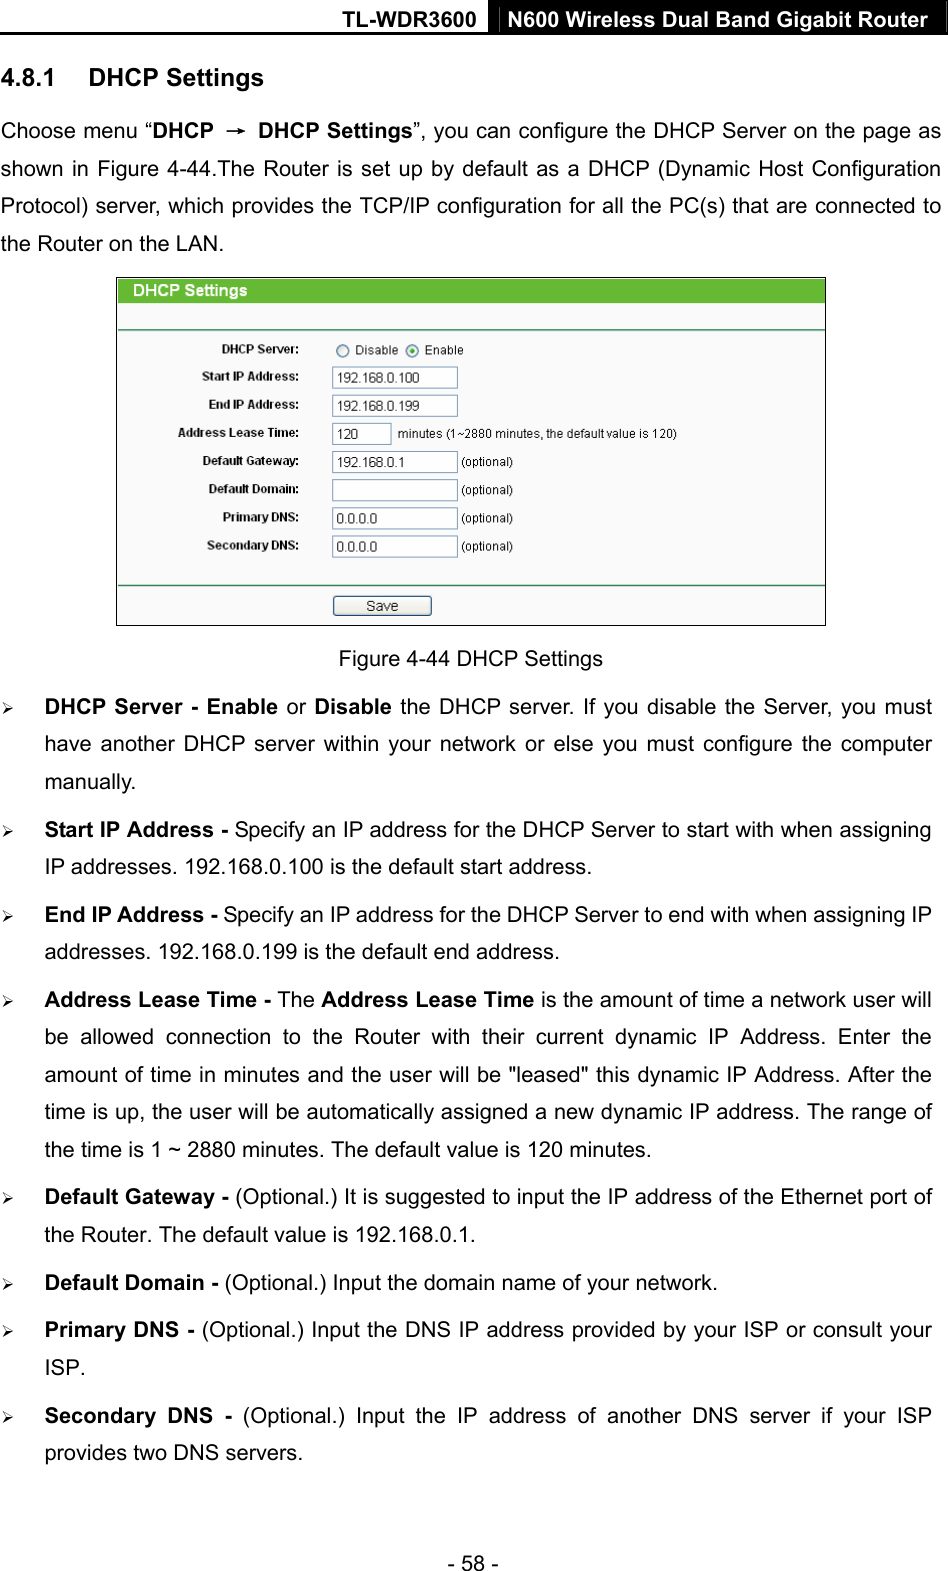 TL-WDR3600 N600 Wireless Dual Band Gigabit Router  - 58 - 4.8.1  DHCP Settings Choose menu “DHCP  → DHCP Settings”, you can configure the DHCP Server on the page as shown in Figure 4-44.The Router is set up by default as a DHCP (Dynamic Host Configuration Protocol) server, which provides the TCP/IP configuration for all the PC(s) that are connected to the Router on the LAN.    Figure 4-44 DHCP Settings ¾ DHCP Server - Enable or Disable the DHCP server. If you disable the Server, you must have another DHCP server within your network or else you must configure the computer manually. ¾ Start IP Address - Specify an IP address for the DHCP Server to start with when assigning IP addresses. 192.168.0.100 is the default start address. ¾ End IP Address - Specify an IP address for the DHCP Server to end with when assigning IP addresses. 192.168.0.199 is the default end address. ¾ Address Lease Time - The Address Lease Time is the amount of time a network user will be allowed connection to the Router with their current dynamic IP Address. Enter the amount of time in minutes and the user will be &quot;leased&quot; this dynamic IP Address. After the time is up, the user will be automatically assigned a new dynamic IP address. The range of the time is 1 ~ 2880 minutes. The default value is 120 minutes. ¾ Default Gateway - (Optional.) It is suggested to input the IP address of the Ethernet port of the Router. The default value is 192.168.0.1. ¾ Default Domain - (Optional.) Input the domain name of your network. ¾ Primary DNS - (Optional.) Input the DNS IP address provided by your ISP or consult your ISP. ¾ Secondary DNS - (Optional.) Input the IP address of another DNS server if your ISP provides two DNS servers. 